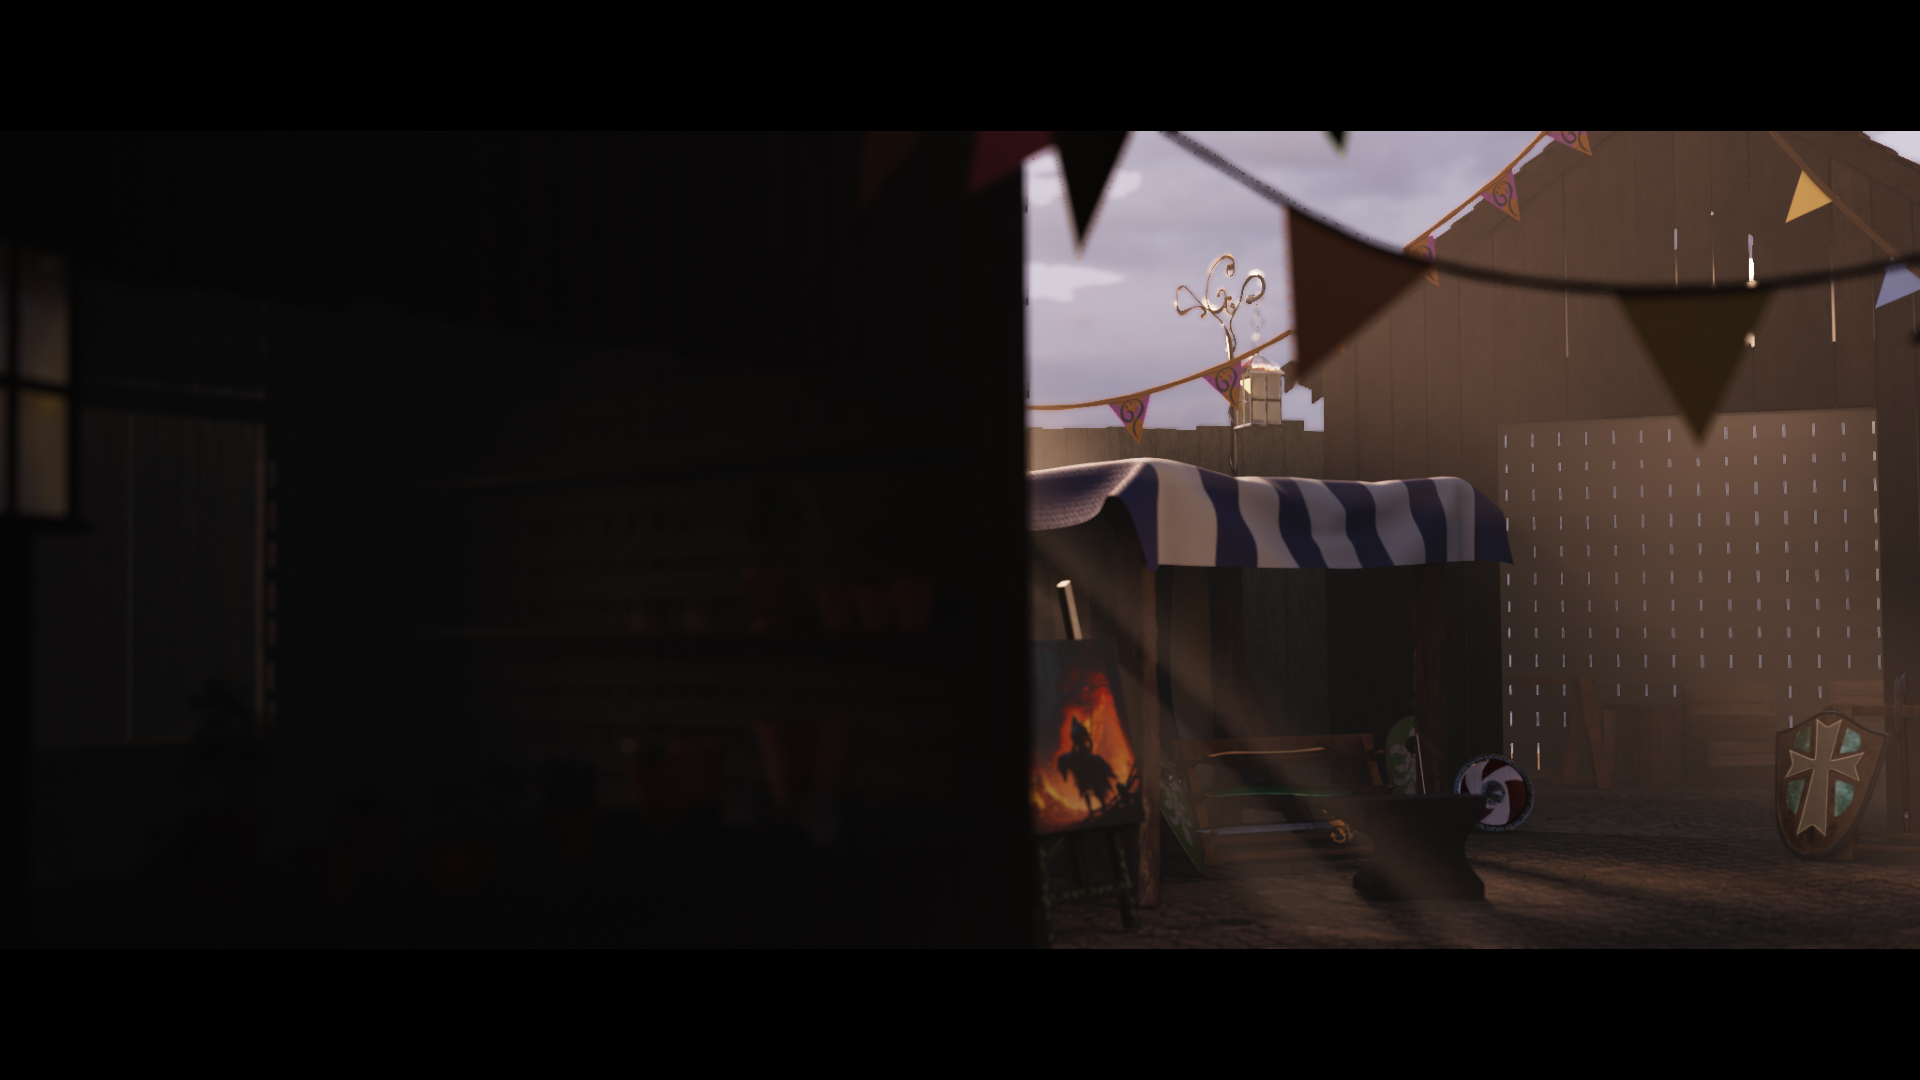 A CG market render showing a fantasy styled medieval market.